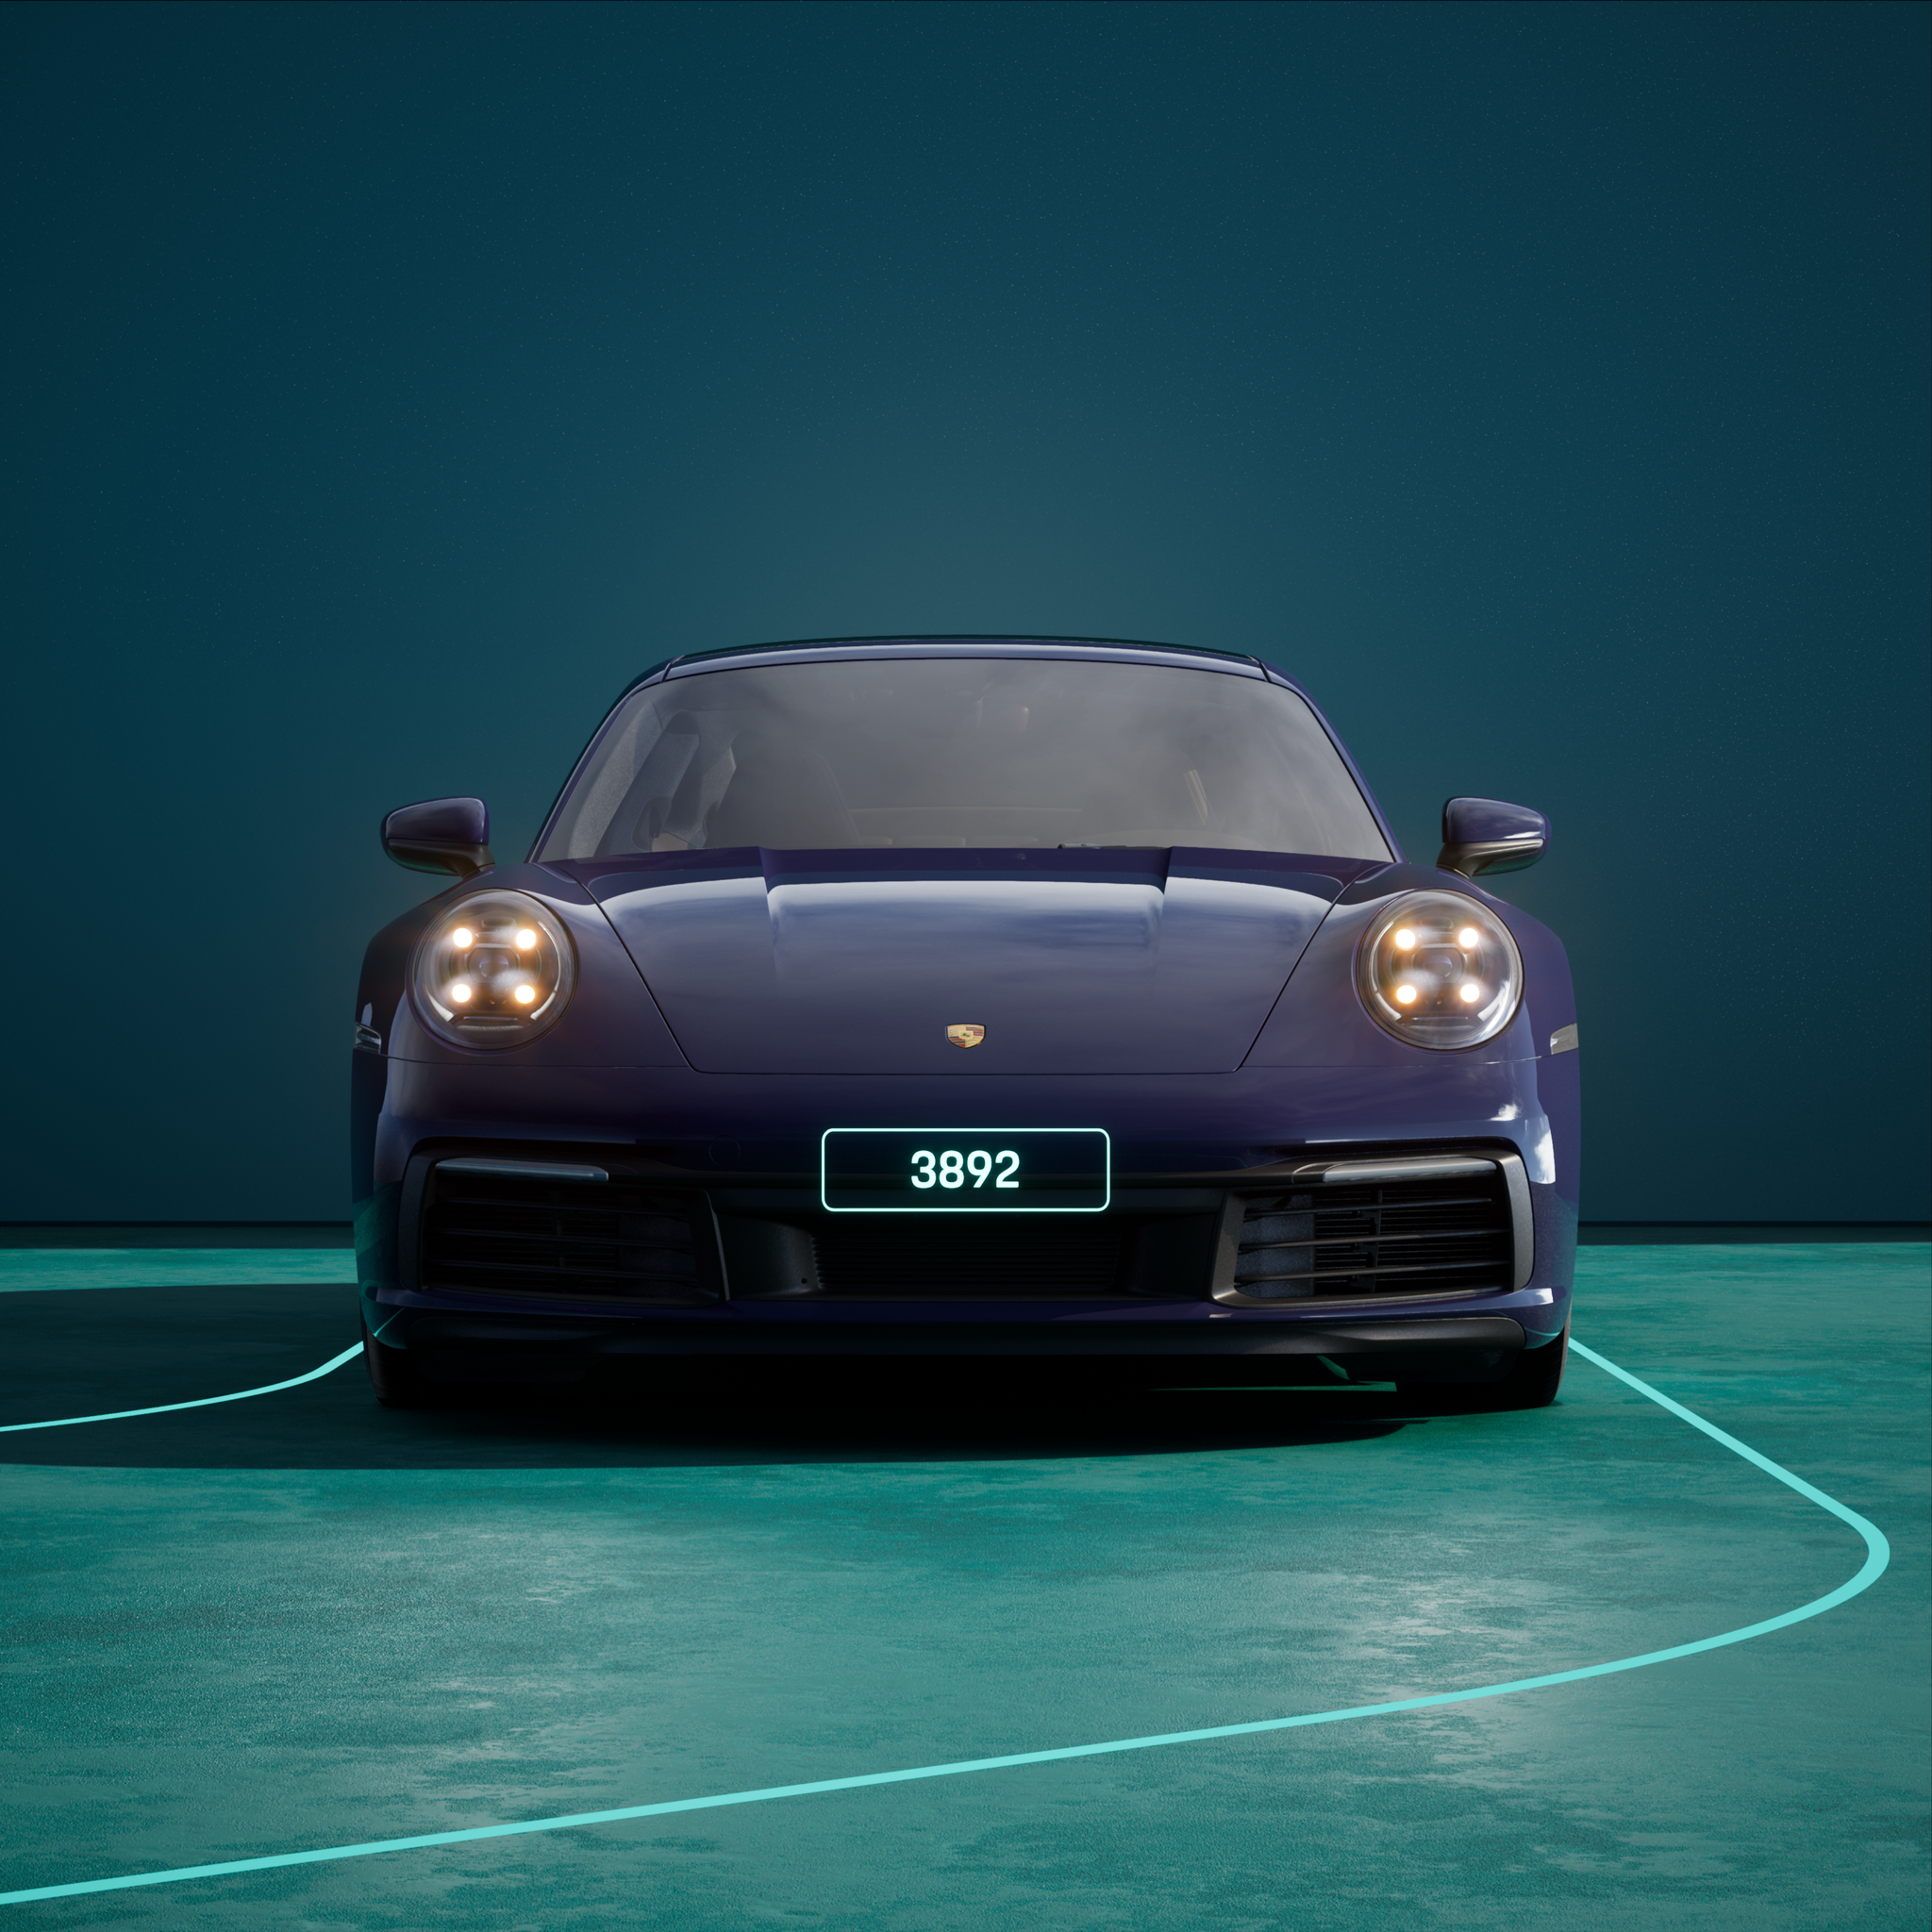 The PORSCHΞ 911 3892 image in phase